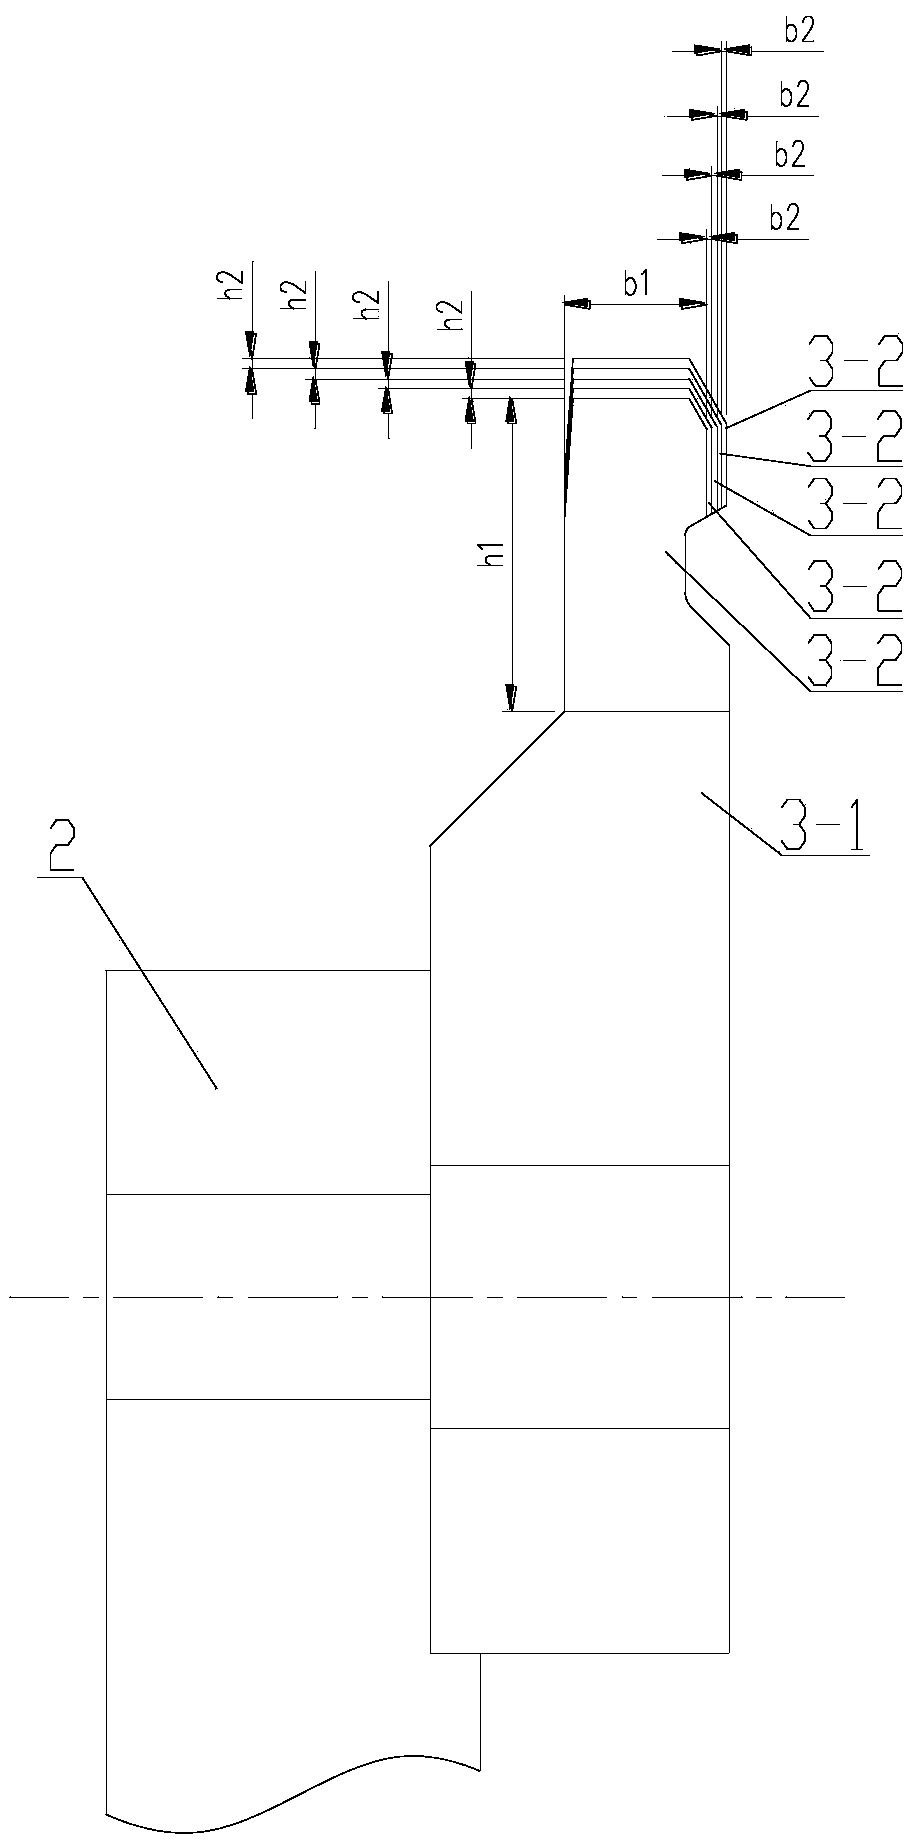 Scraper for processing concave profile of wood and plastic sheet materials